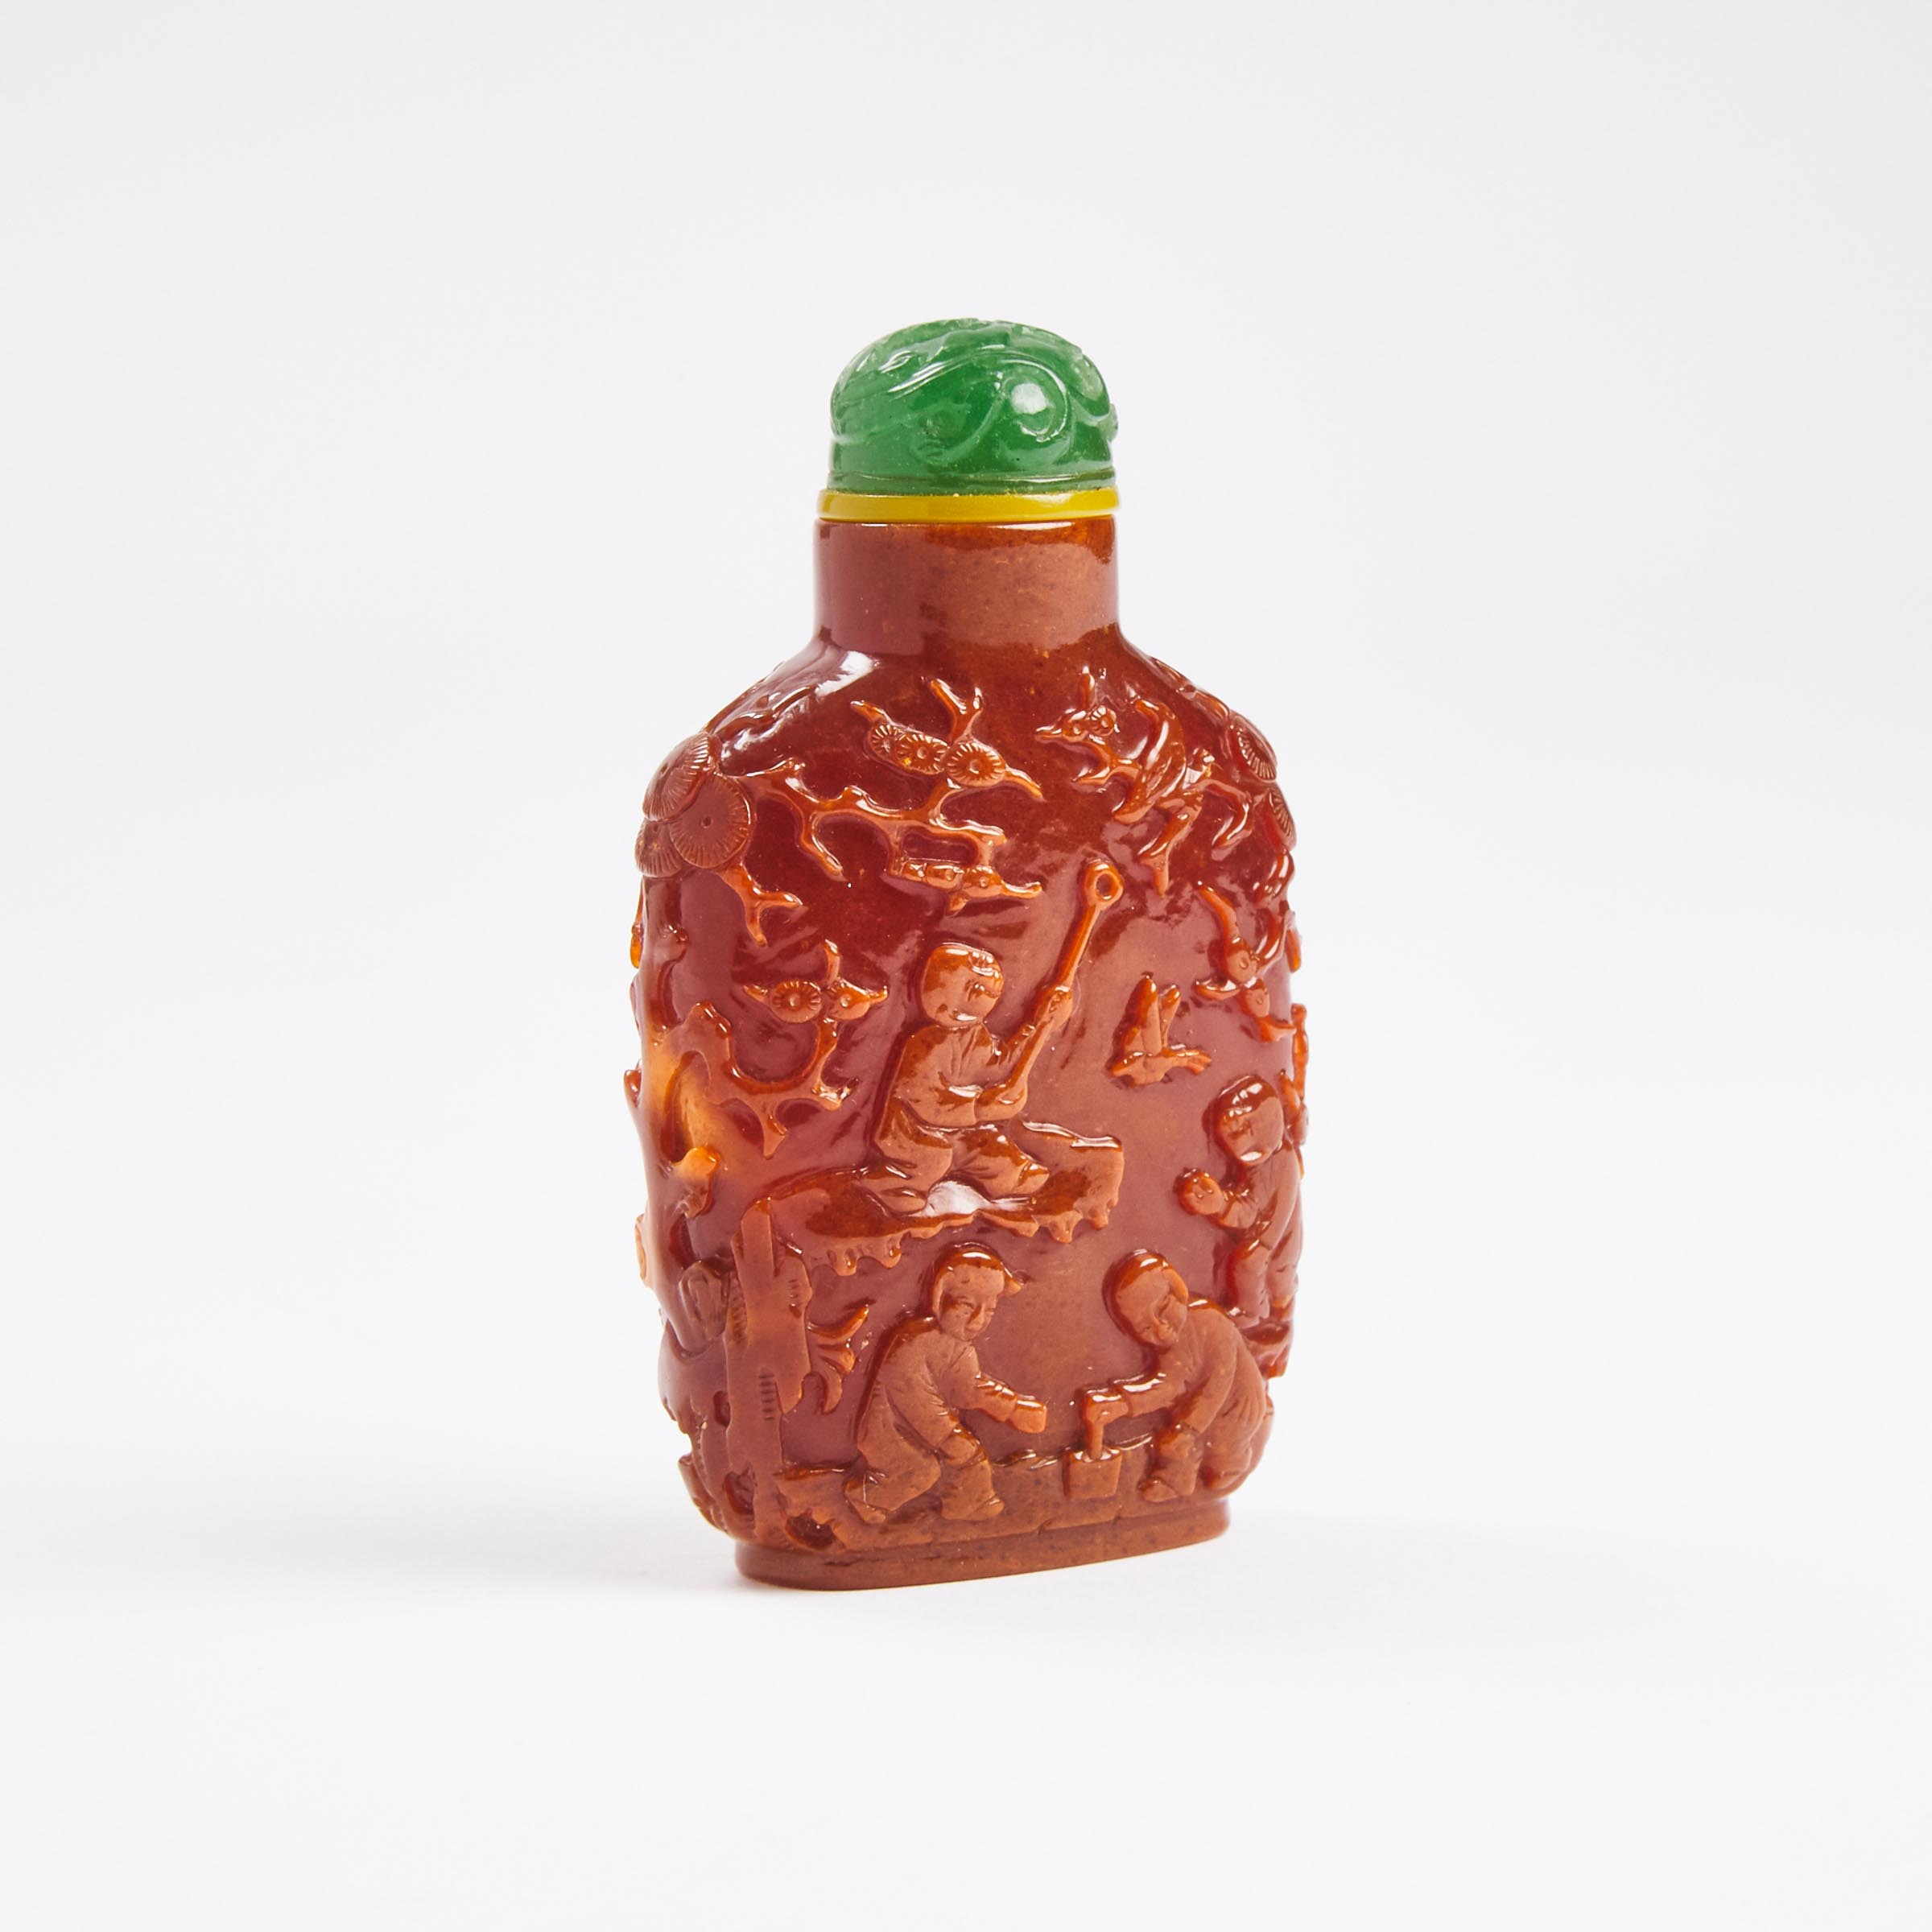 A Large Carved Amber 'Boys' Snuff Bottle, 18th/19th Century